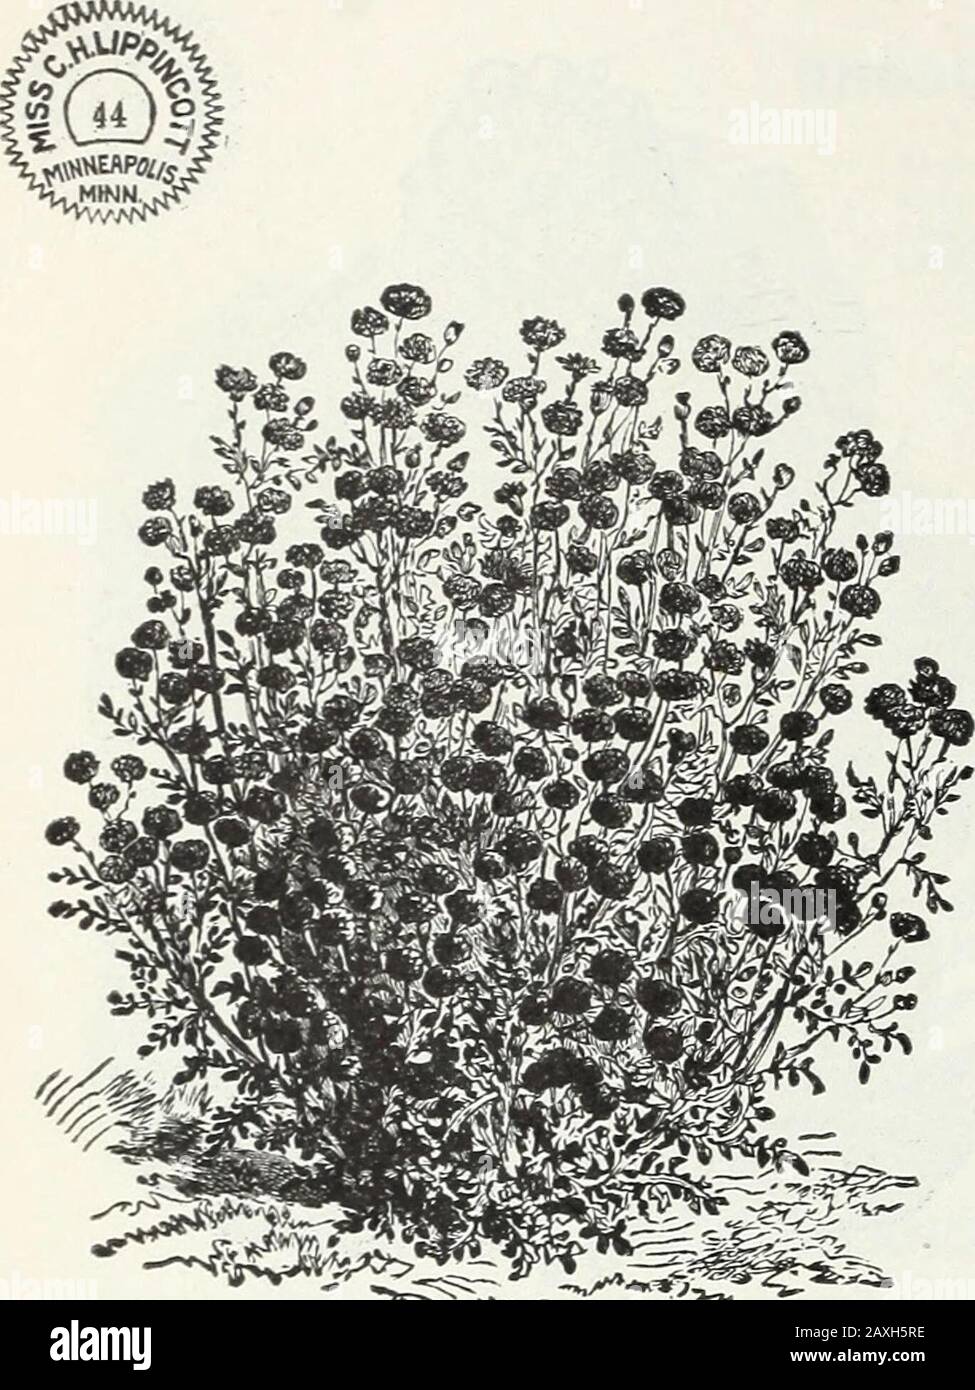 Flower seeds . Sprague, Williamstown, Vt-, March 4th,1898, writes.—I have had your seeds for two years andhave been very well pleased with them. SNOWBALL, SCABIOSA. The flowers are very large, meas-uring fully two inches in diam-eter, of purest white and verydouble. It comes quite true fromseed. Pkt., 50 seeds, 4 cts. SCABIOSA,DOUBLE BLACK. A new variety with elegantdouble black-purple flowers—sodeep in color as to appear nearlycoal-black. Pkt., 50 seeds,4c. SCABIOSA.—Mixed double,all colors. Pkt., 75 seeds, &c. Largest Flowering Stocks. STOCKS, TEN WEEKS. The Largest Flowering Globe Pyramidal Stock Photo